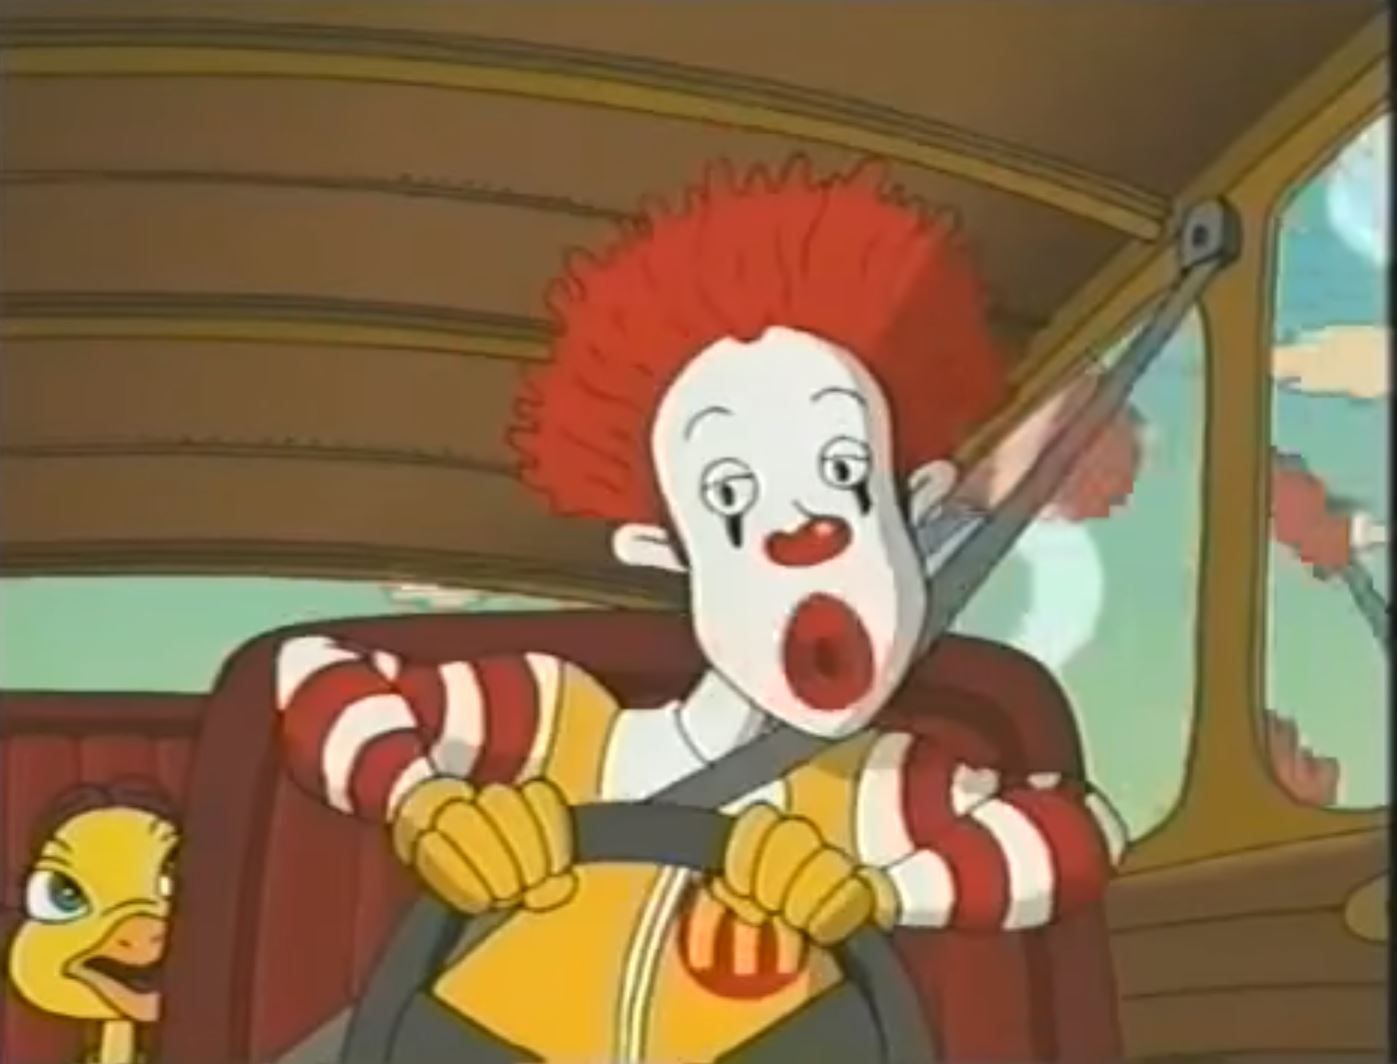 Remembering The Bizarre McDonald's Halloween Promotions You Used To Be Obsessed With